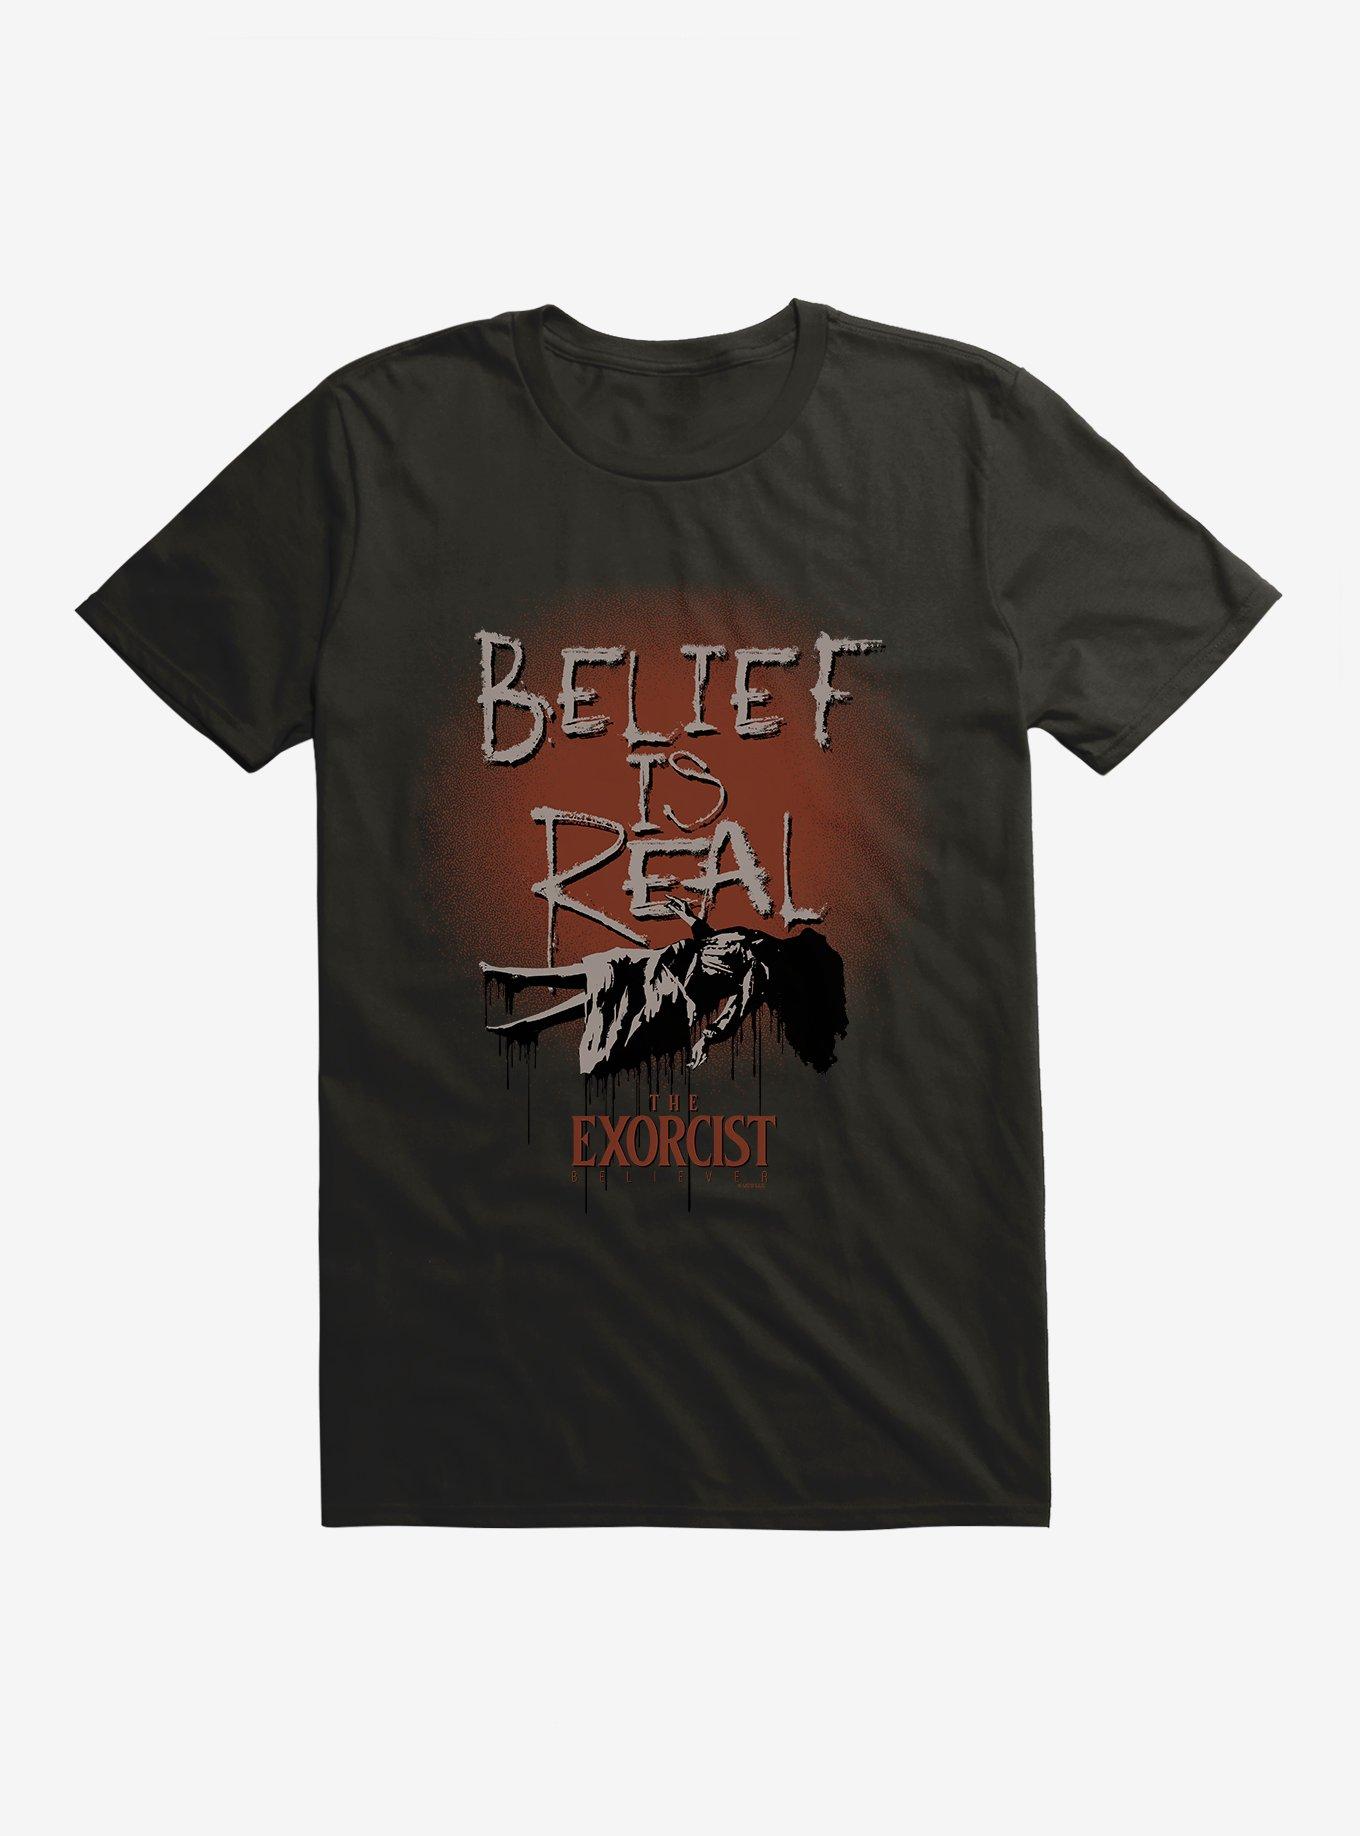 The Exorcist Believer Belief Is Real T-Shirt